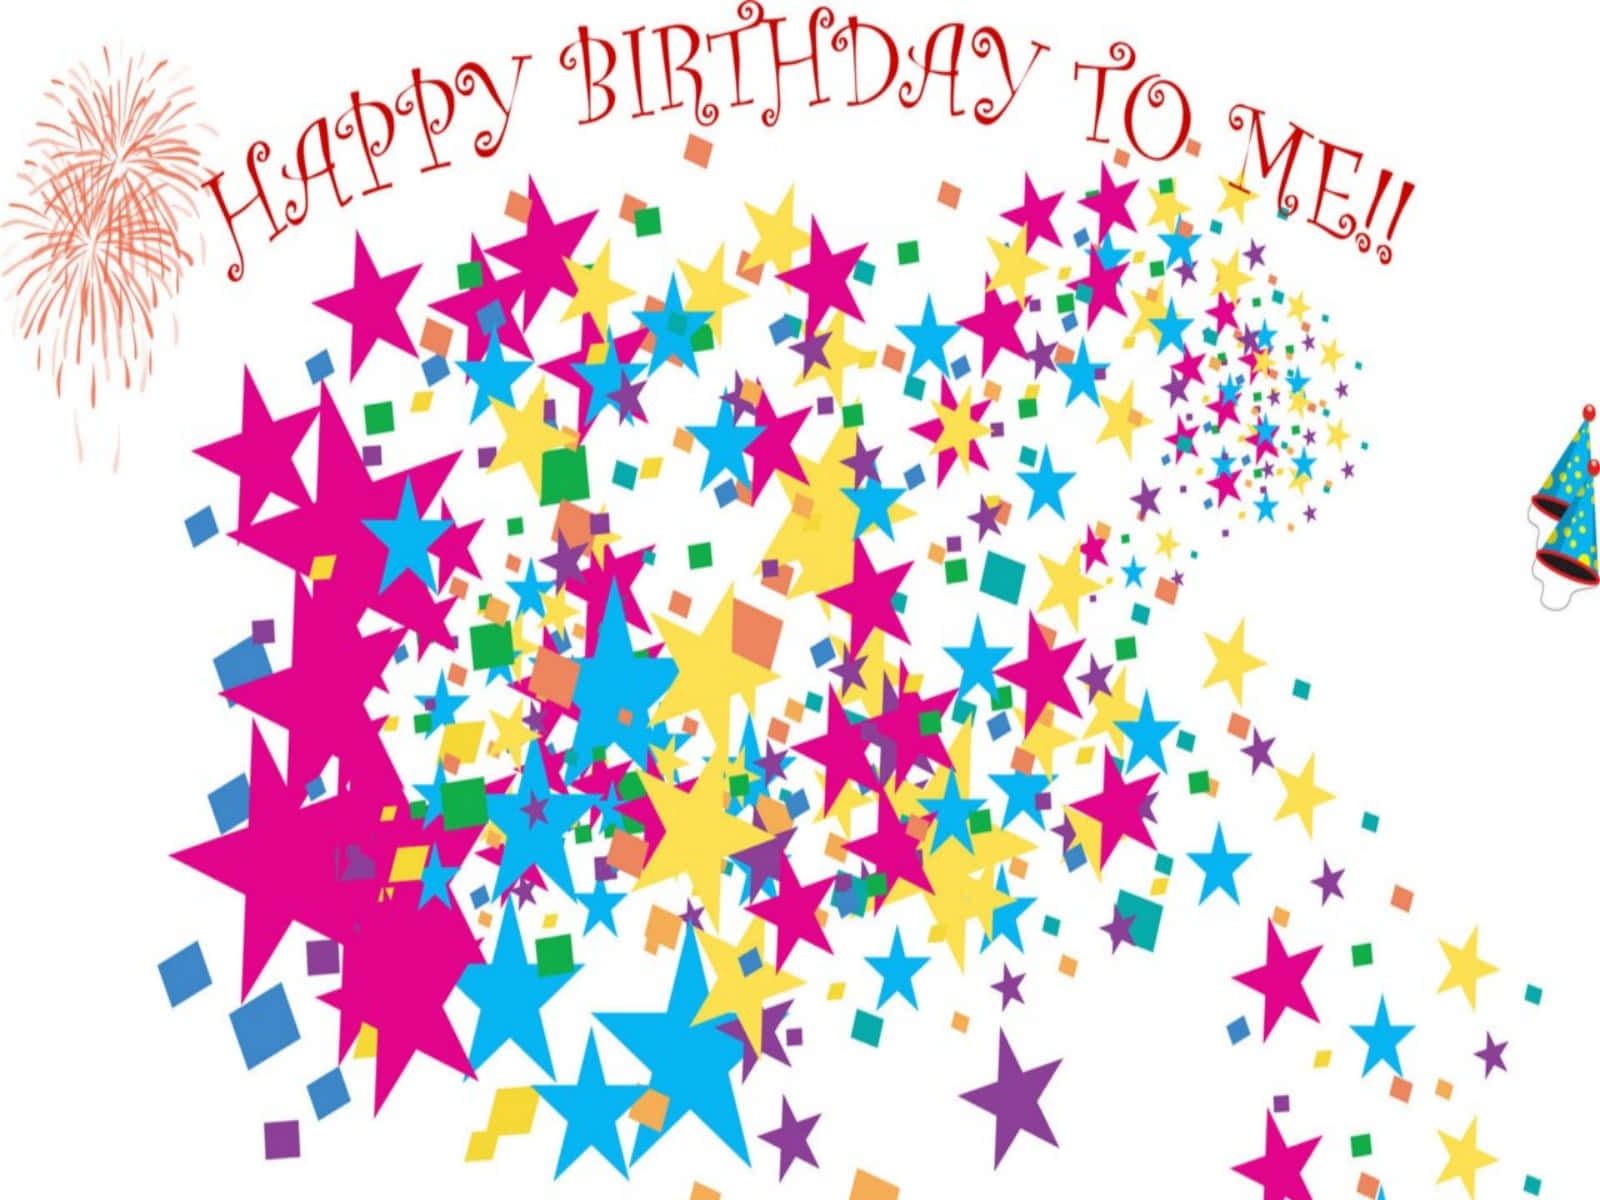 Today is a special day - it's my birthday!